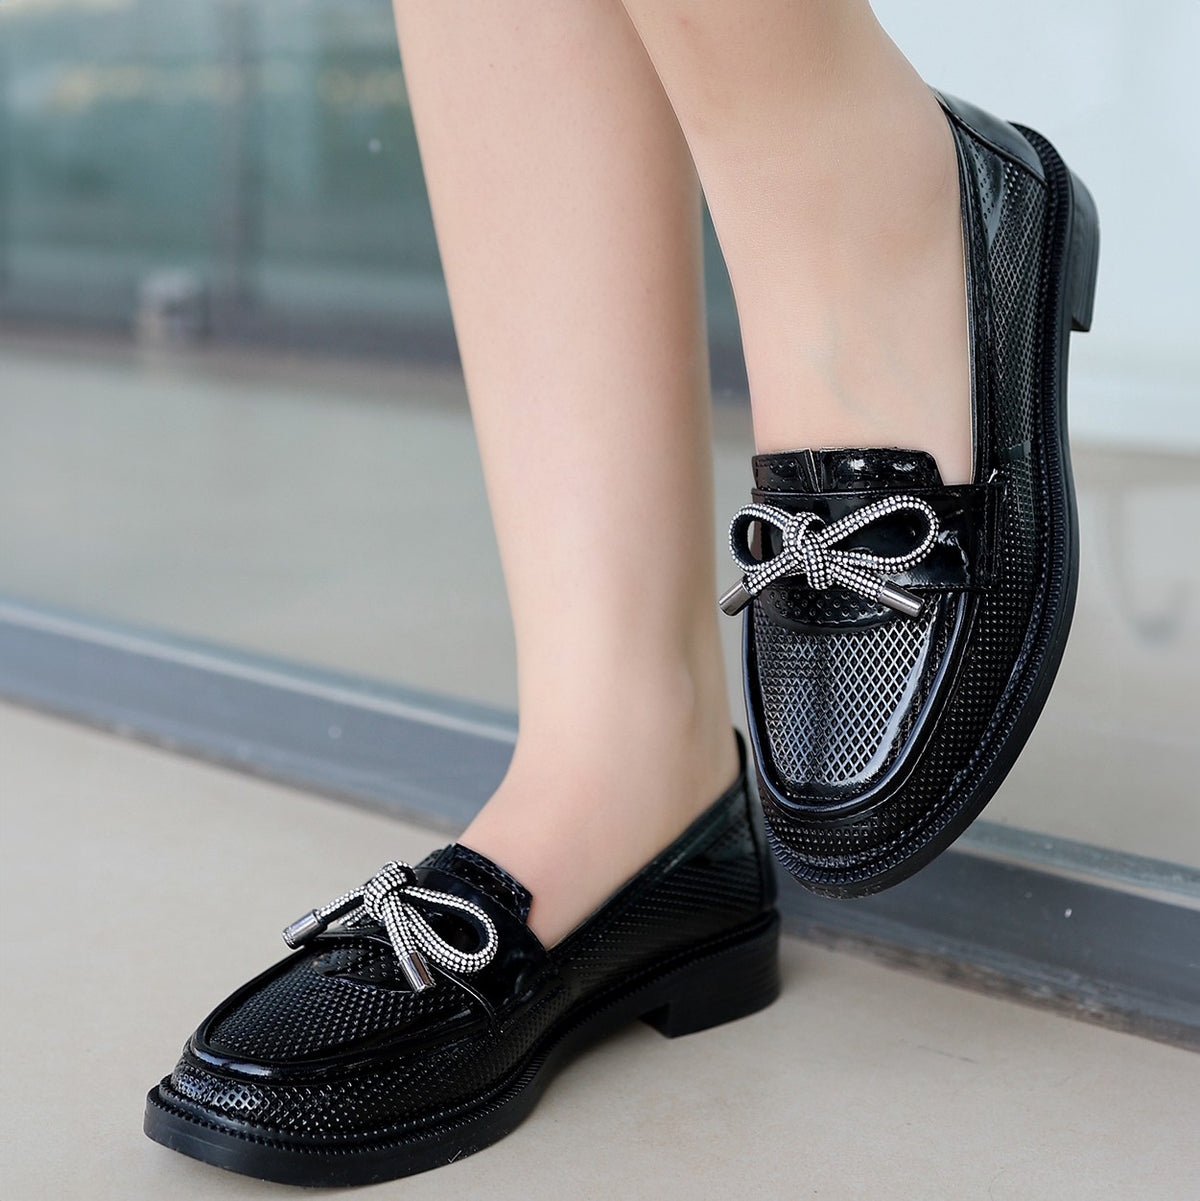 Women's Chay Black Patent Leather Ballerina Shoes - STREETMODE ™